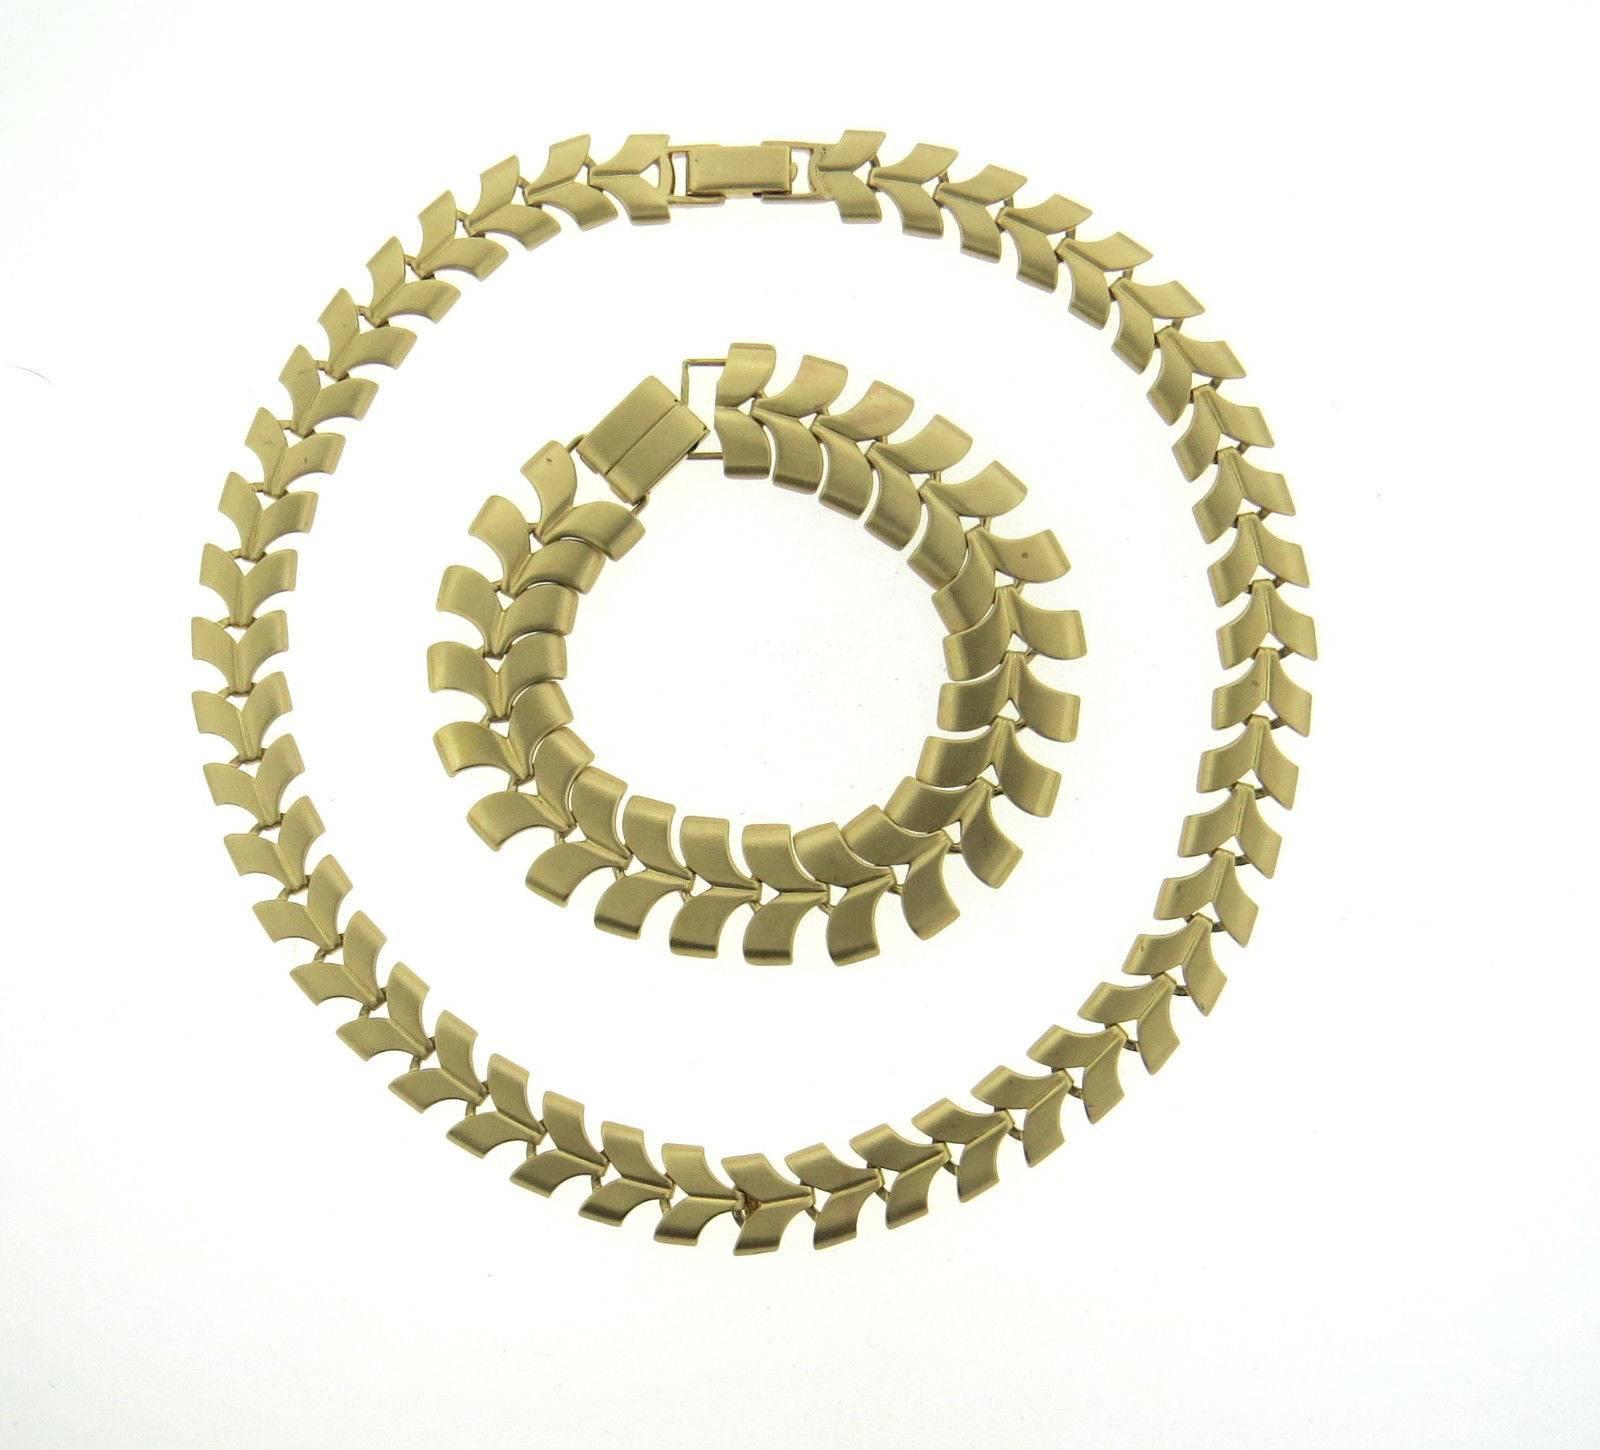 A 14k yellow gold necklace and bracelet set by Tiffany & Co.  The necklace is 16 1/4